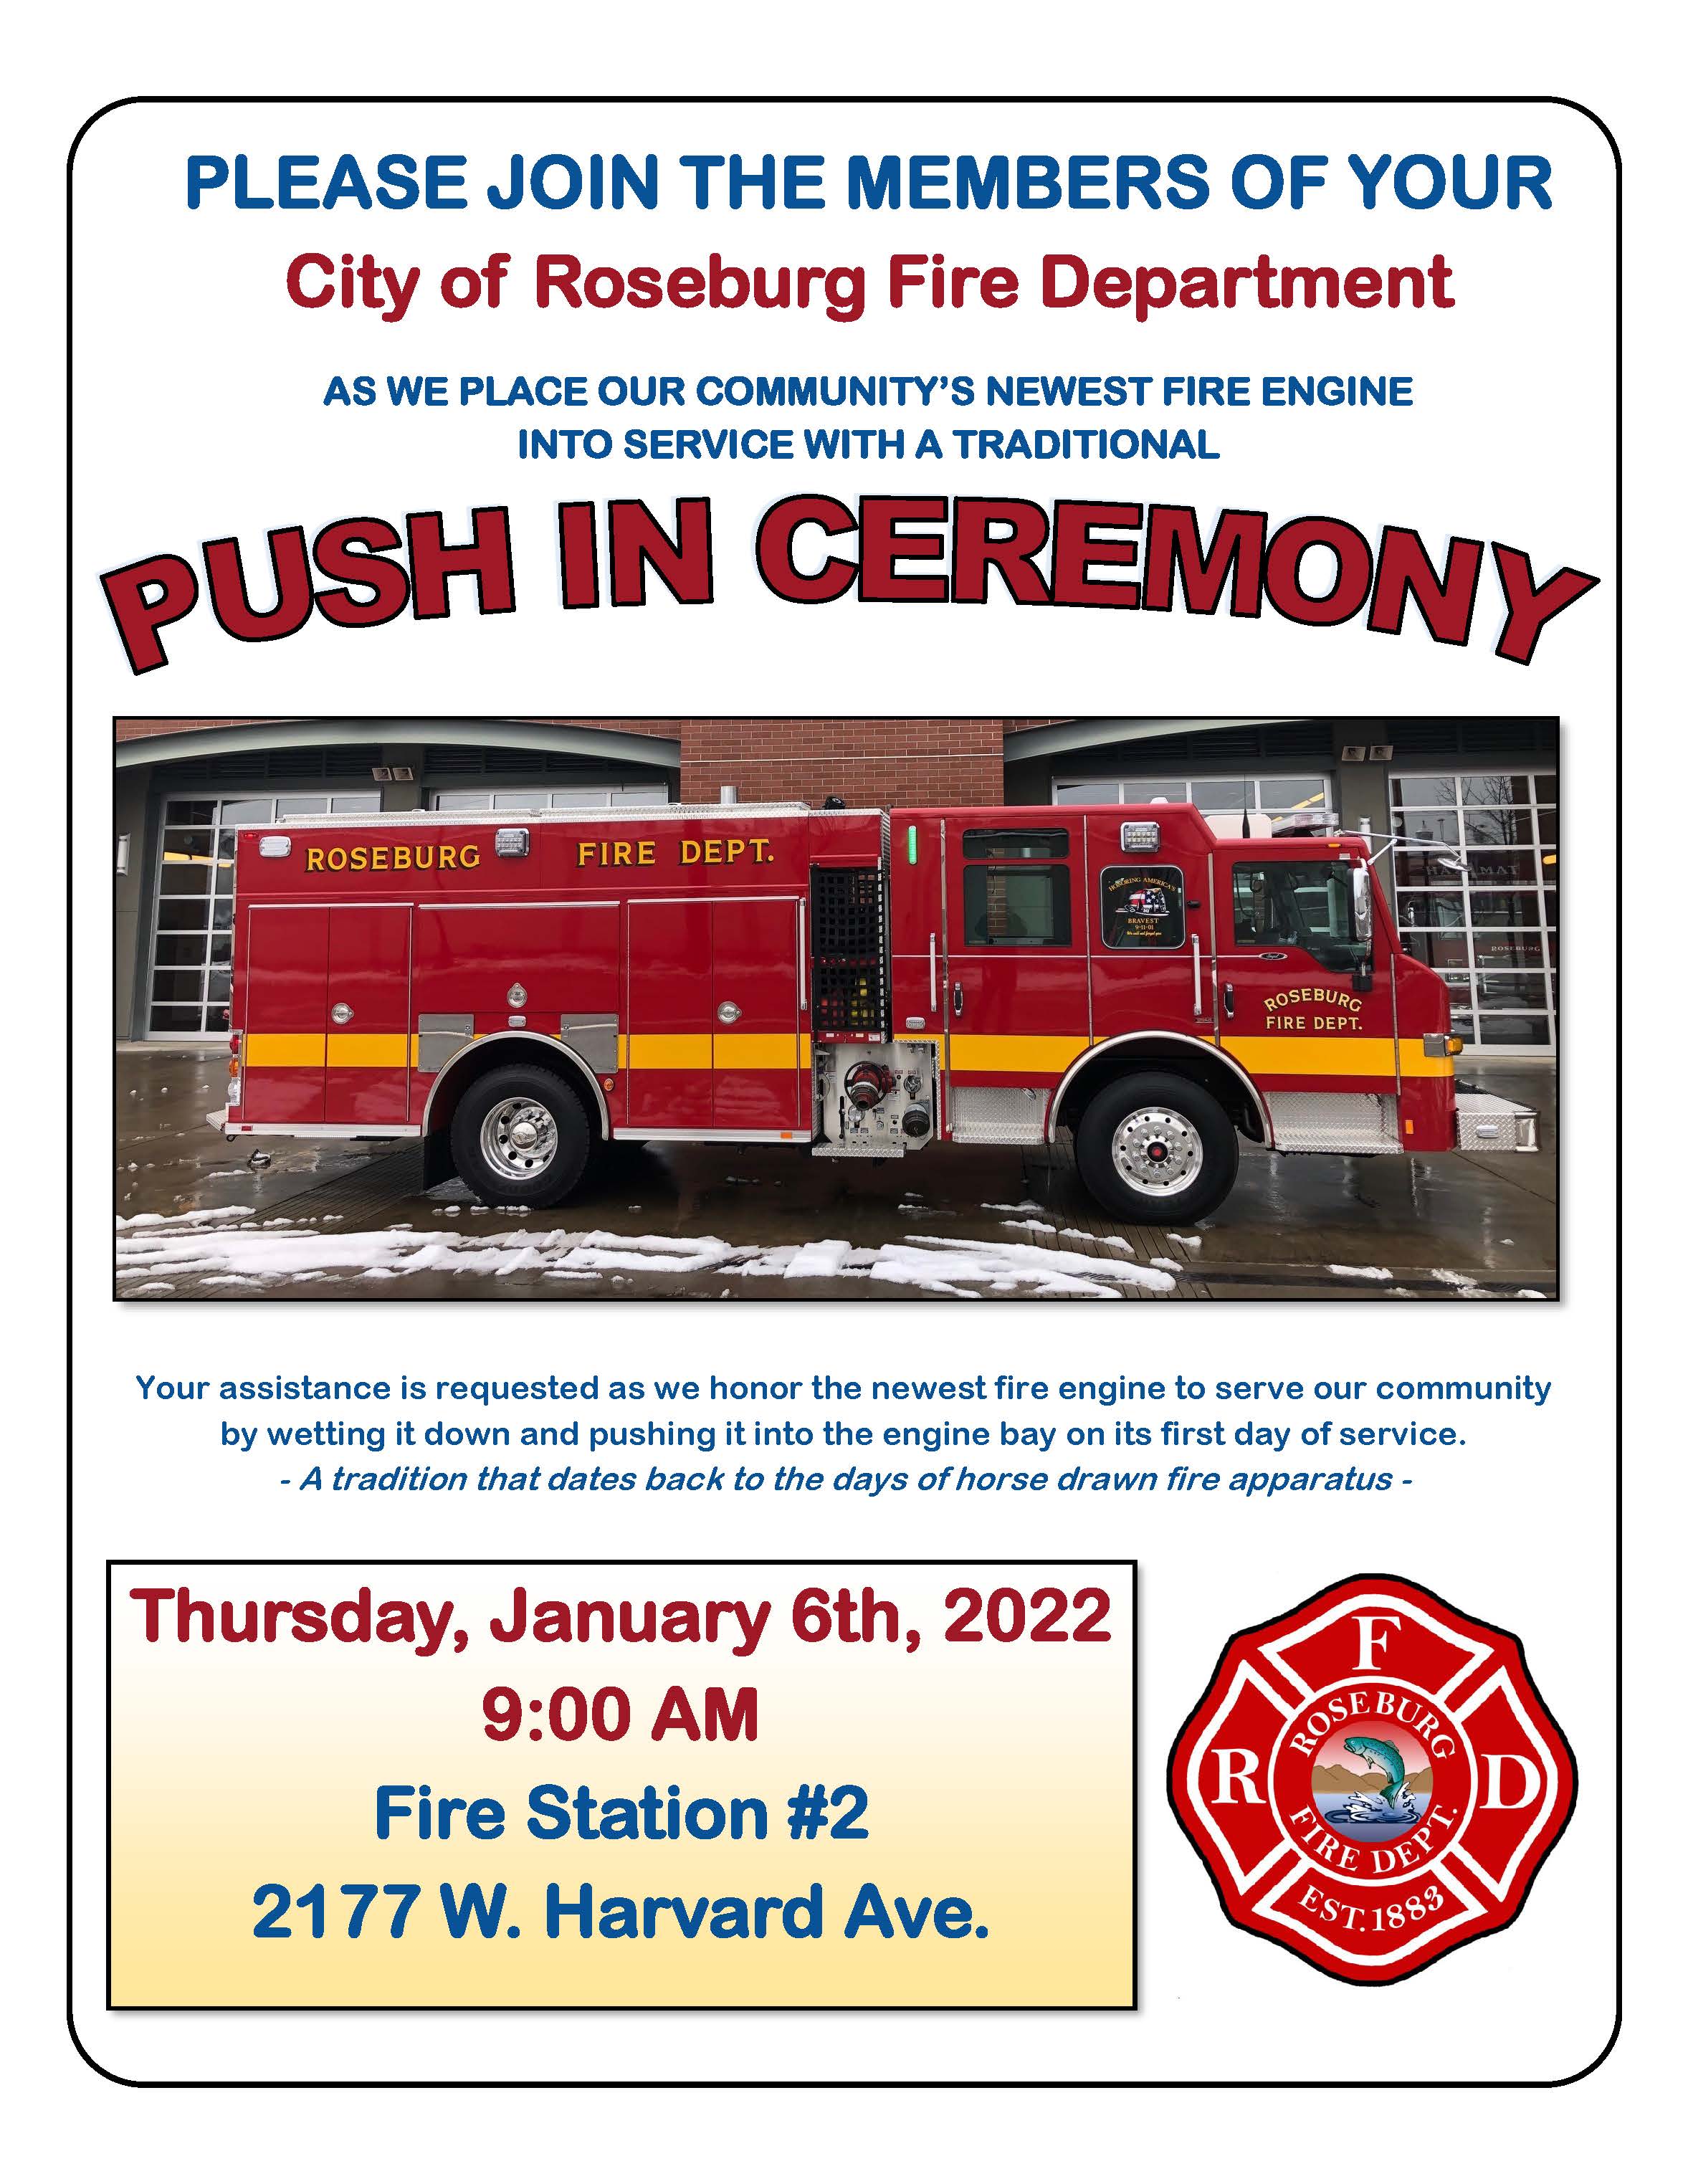 New Fire Engine Dedication Ceremony - 1-3-22 (Photo) featured image